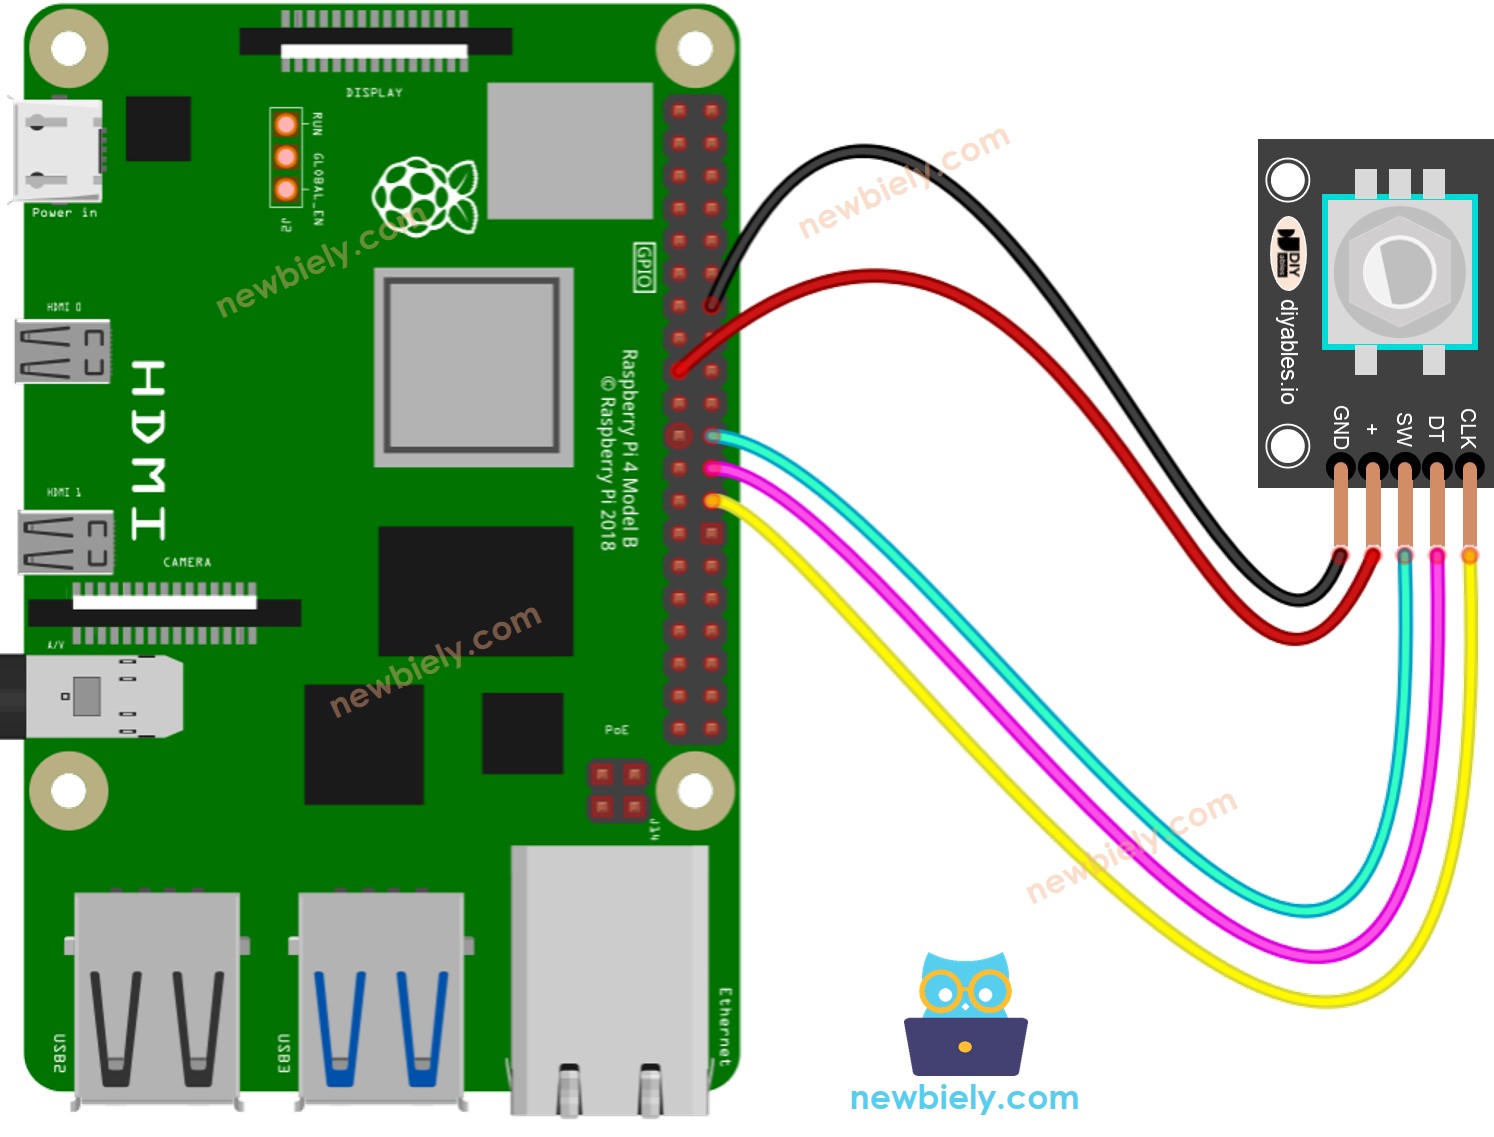 The wiring diagram between Raspberry Pi and rotary encoder